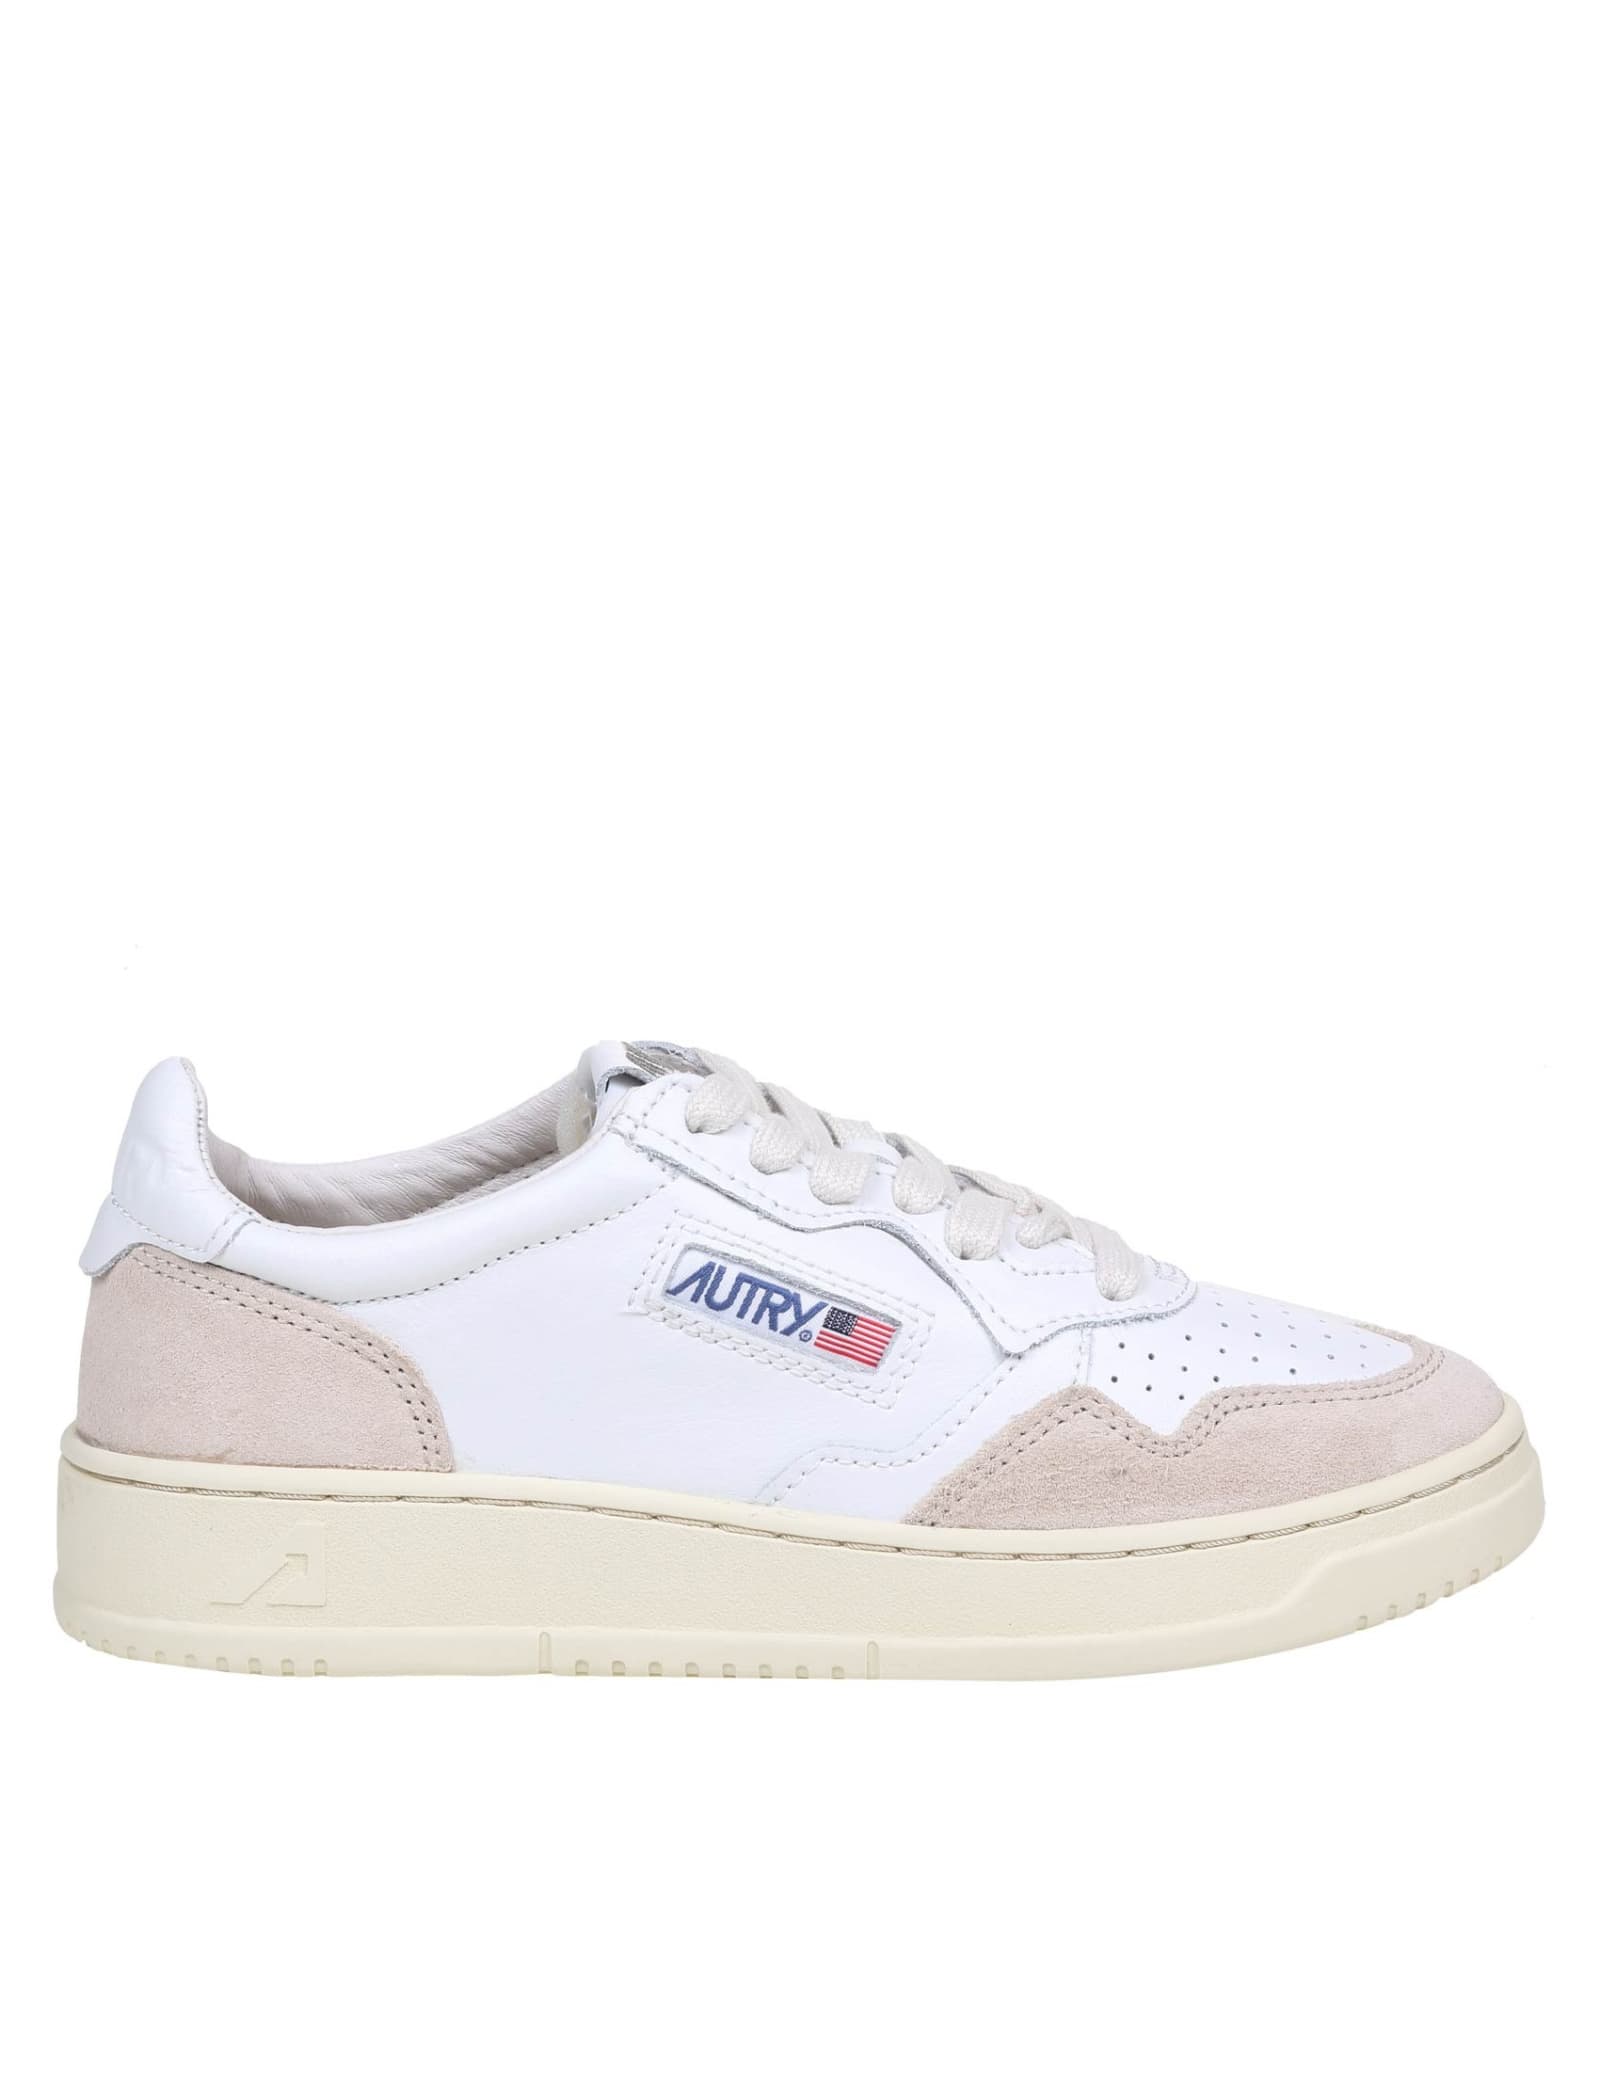 Autry Sneakers In White And Pink Leather